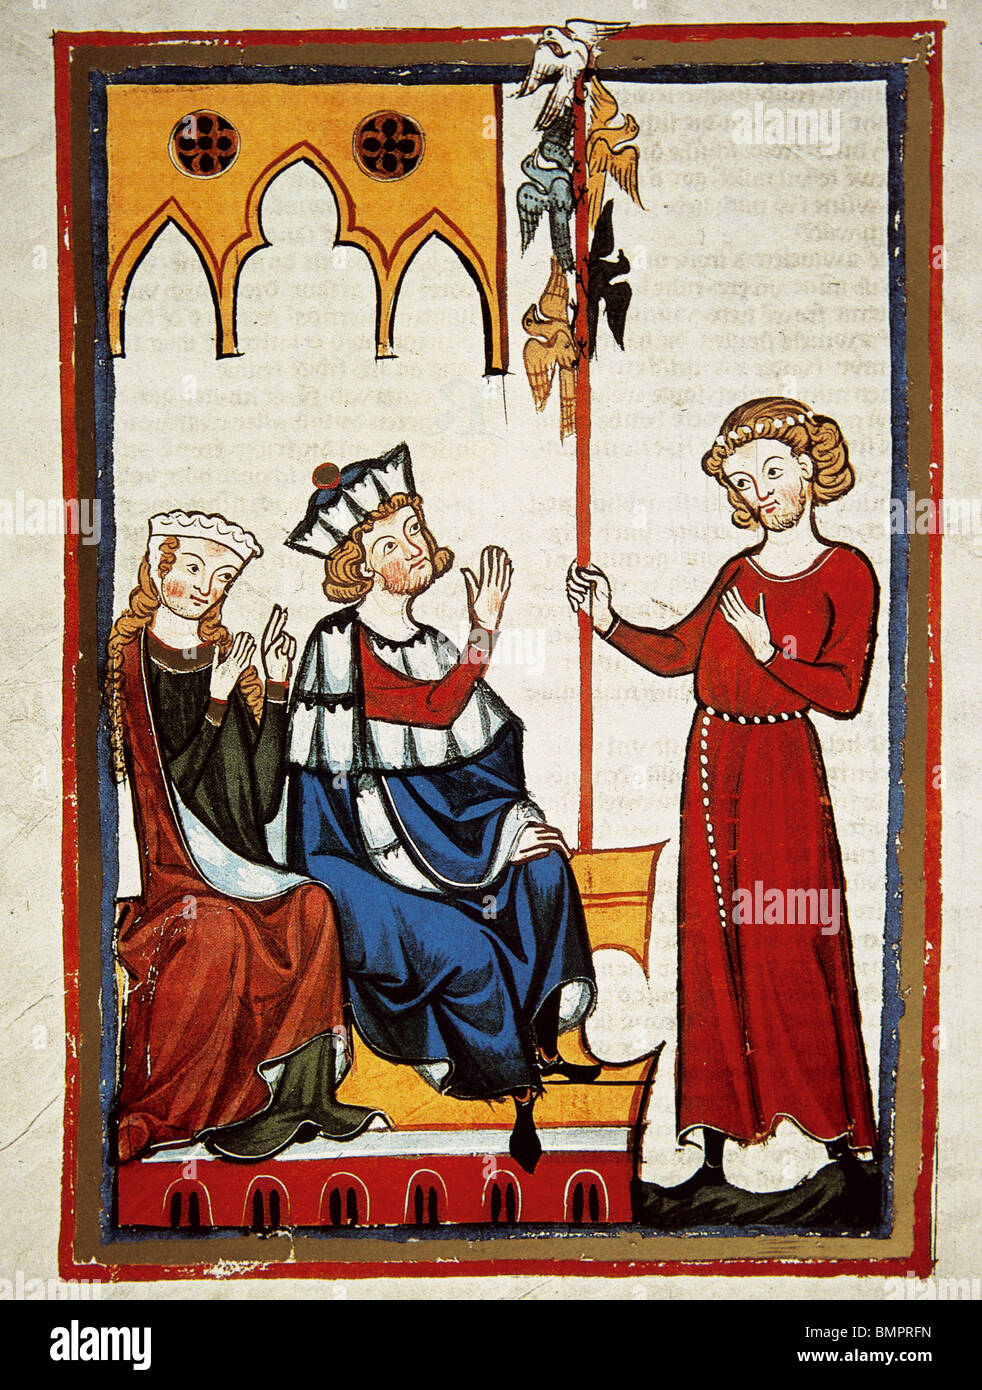 Spervogel, poet of the 12th century, offers his lyrics to the Court. Codex Manesse. Stock Photo